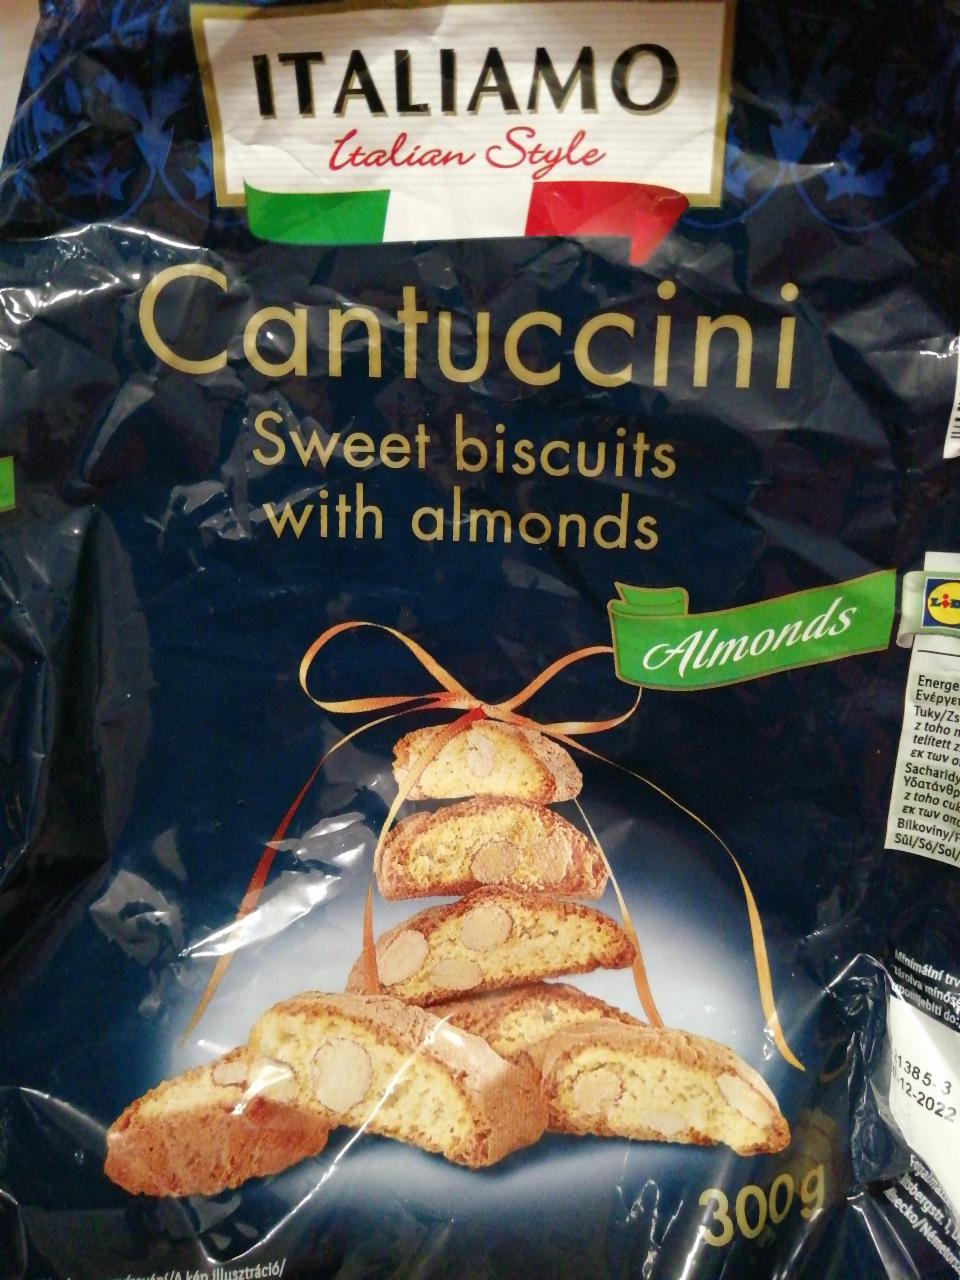 Italiamo kJ with kalorie, biscuits Cantuccini nutriční a almonds Sweet hodnoty -